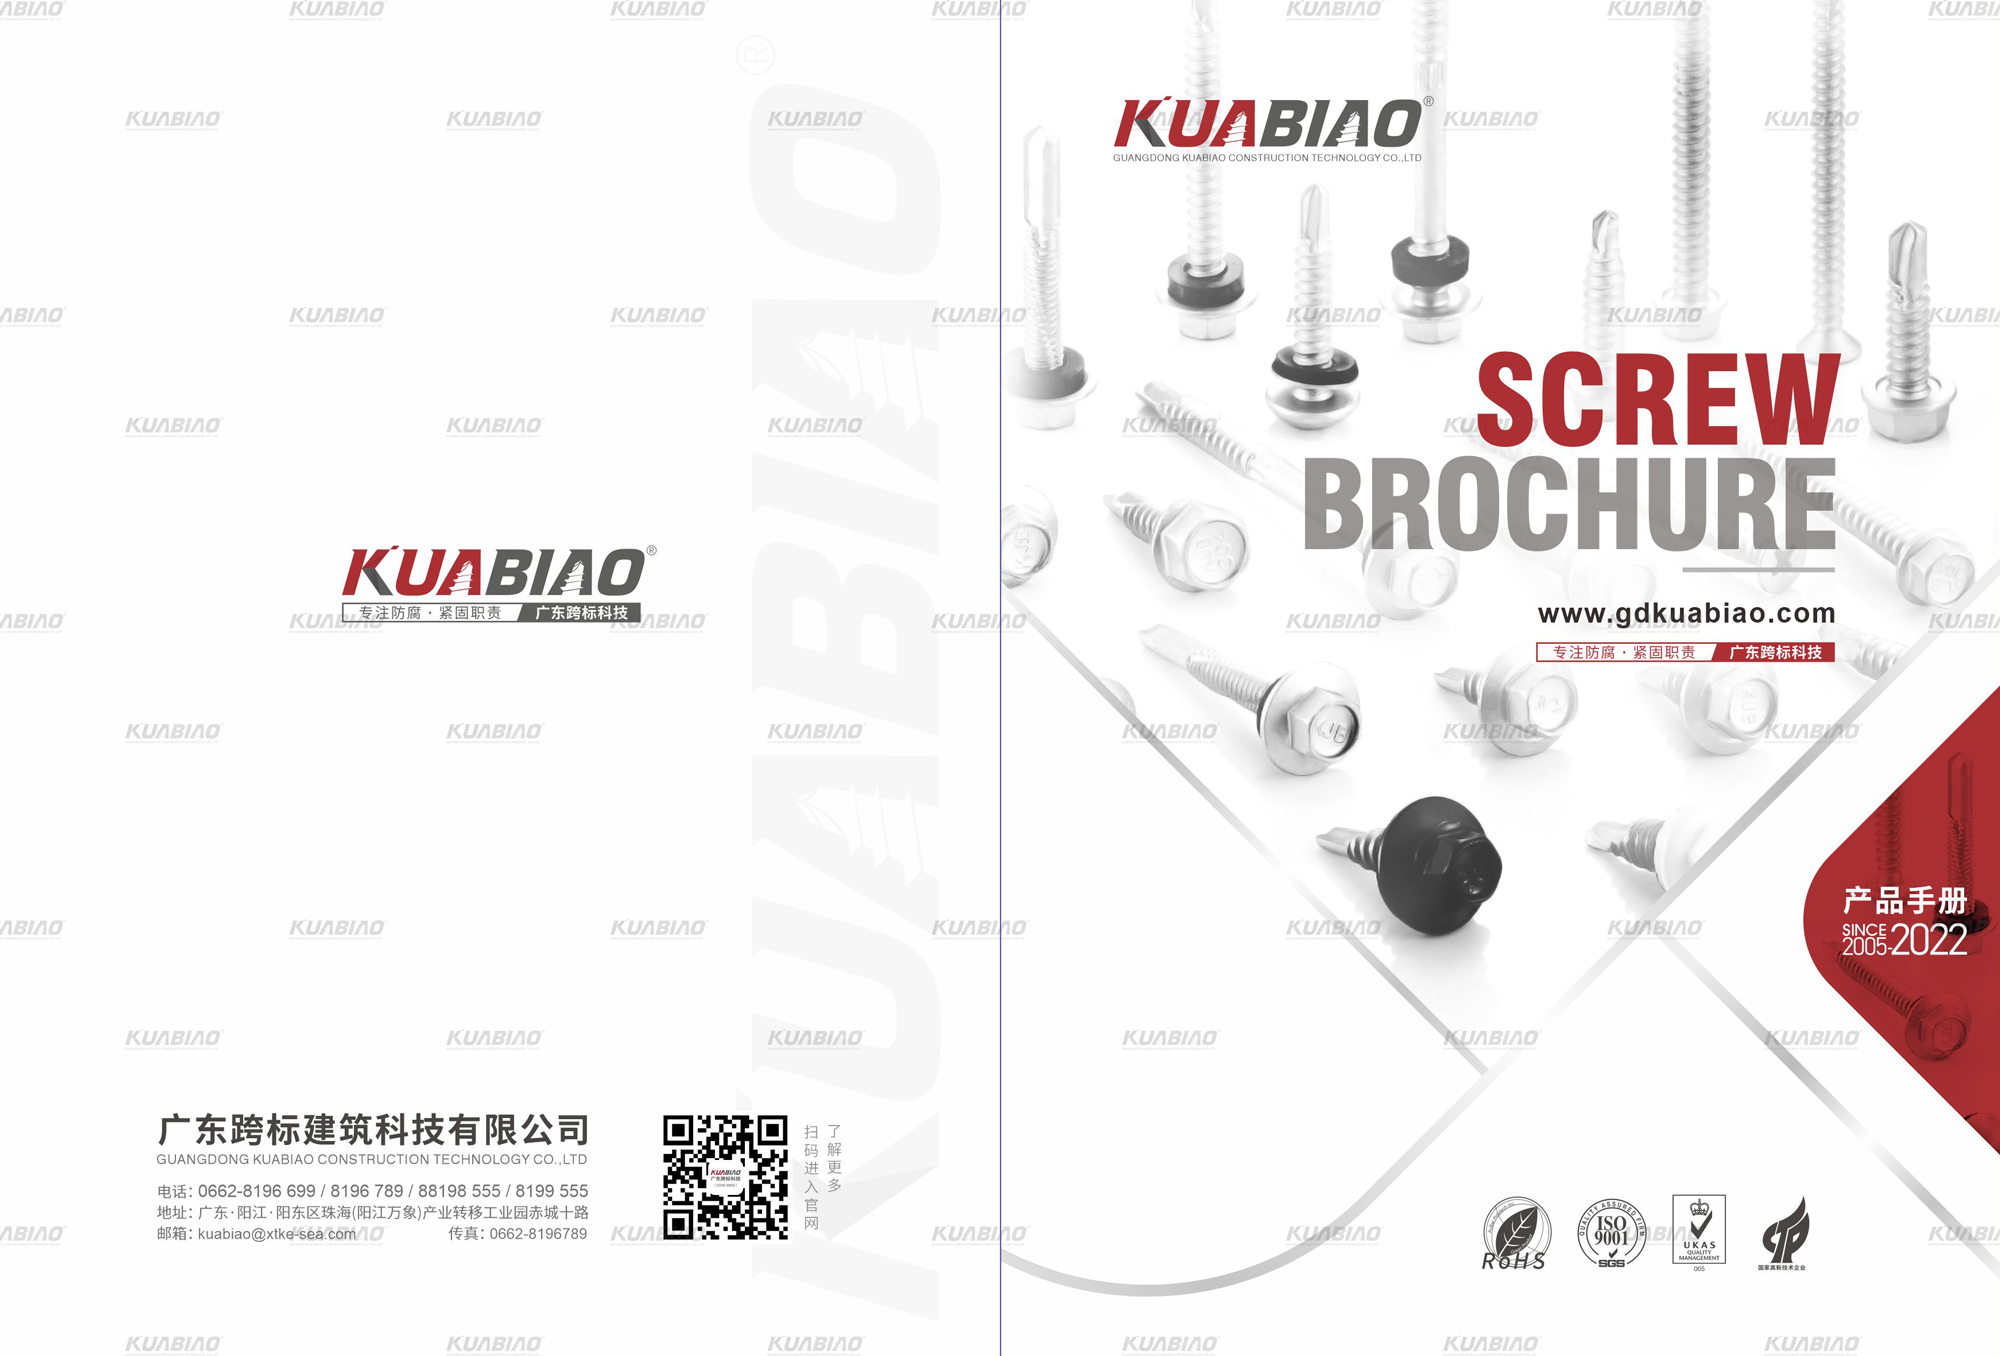 GUANGDONG KUABIAO CONSTRUCTION TECHNOLOGY CO., LTD. _Online Catalogues